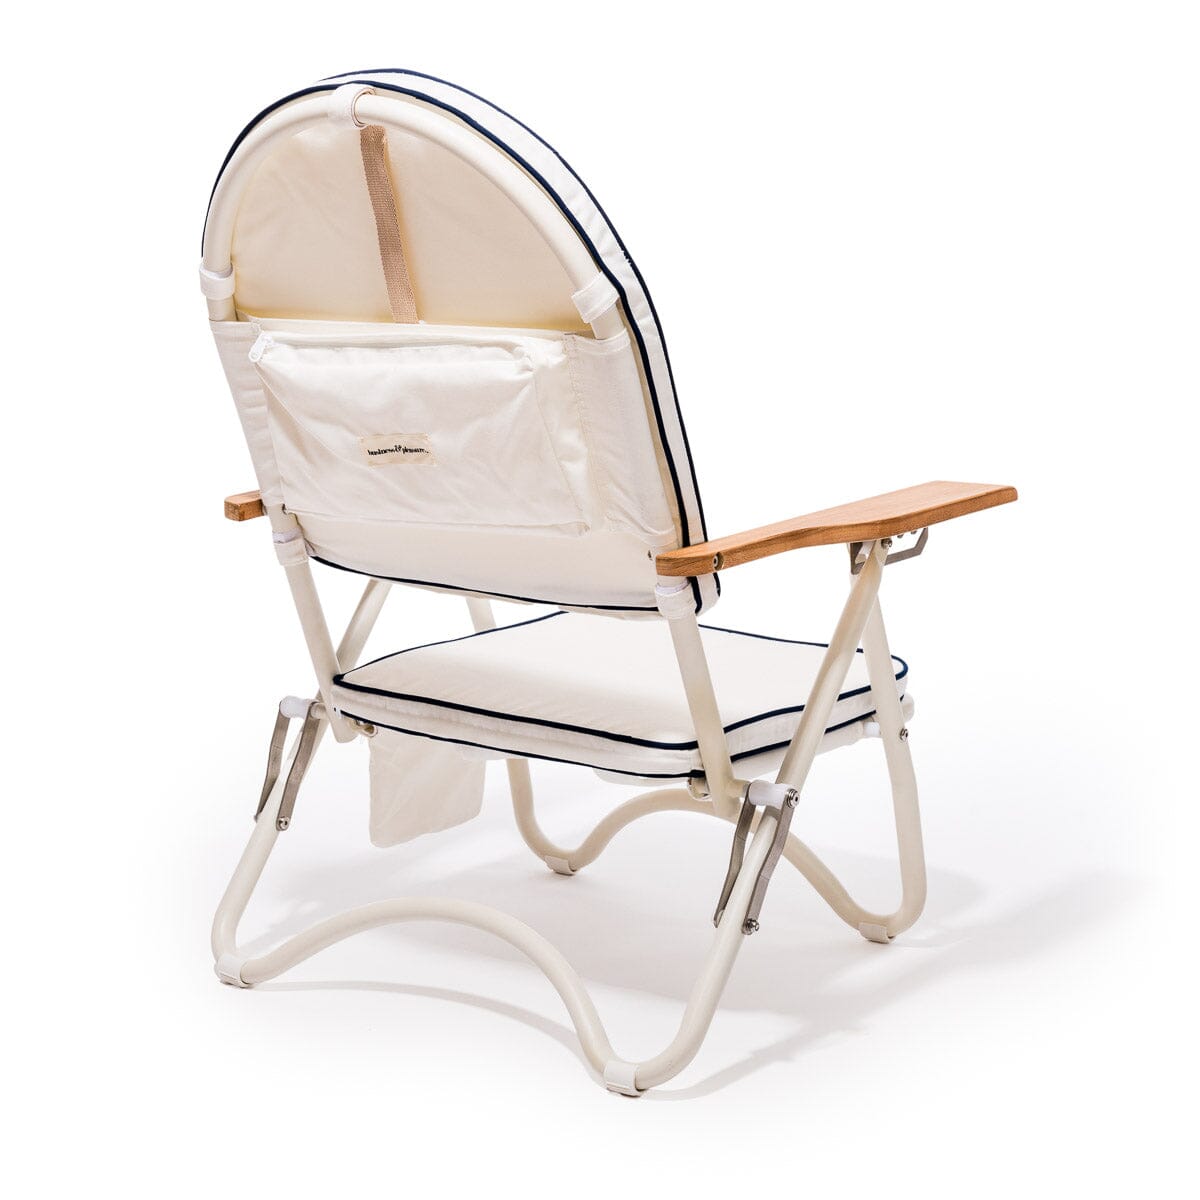 The Pam Chair - Rivie White Pam Chair Business & Pleasure Co 